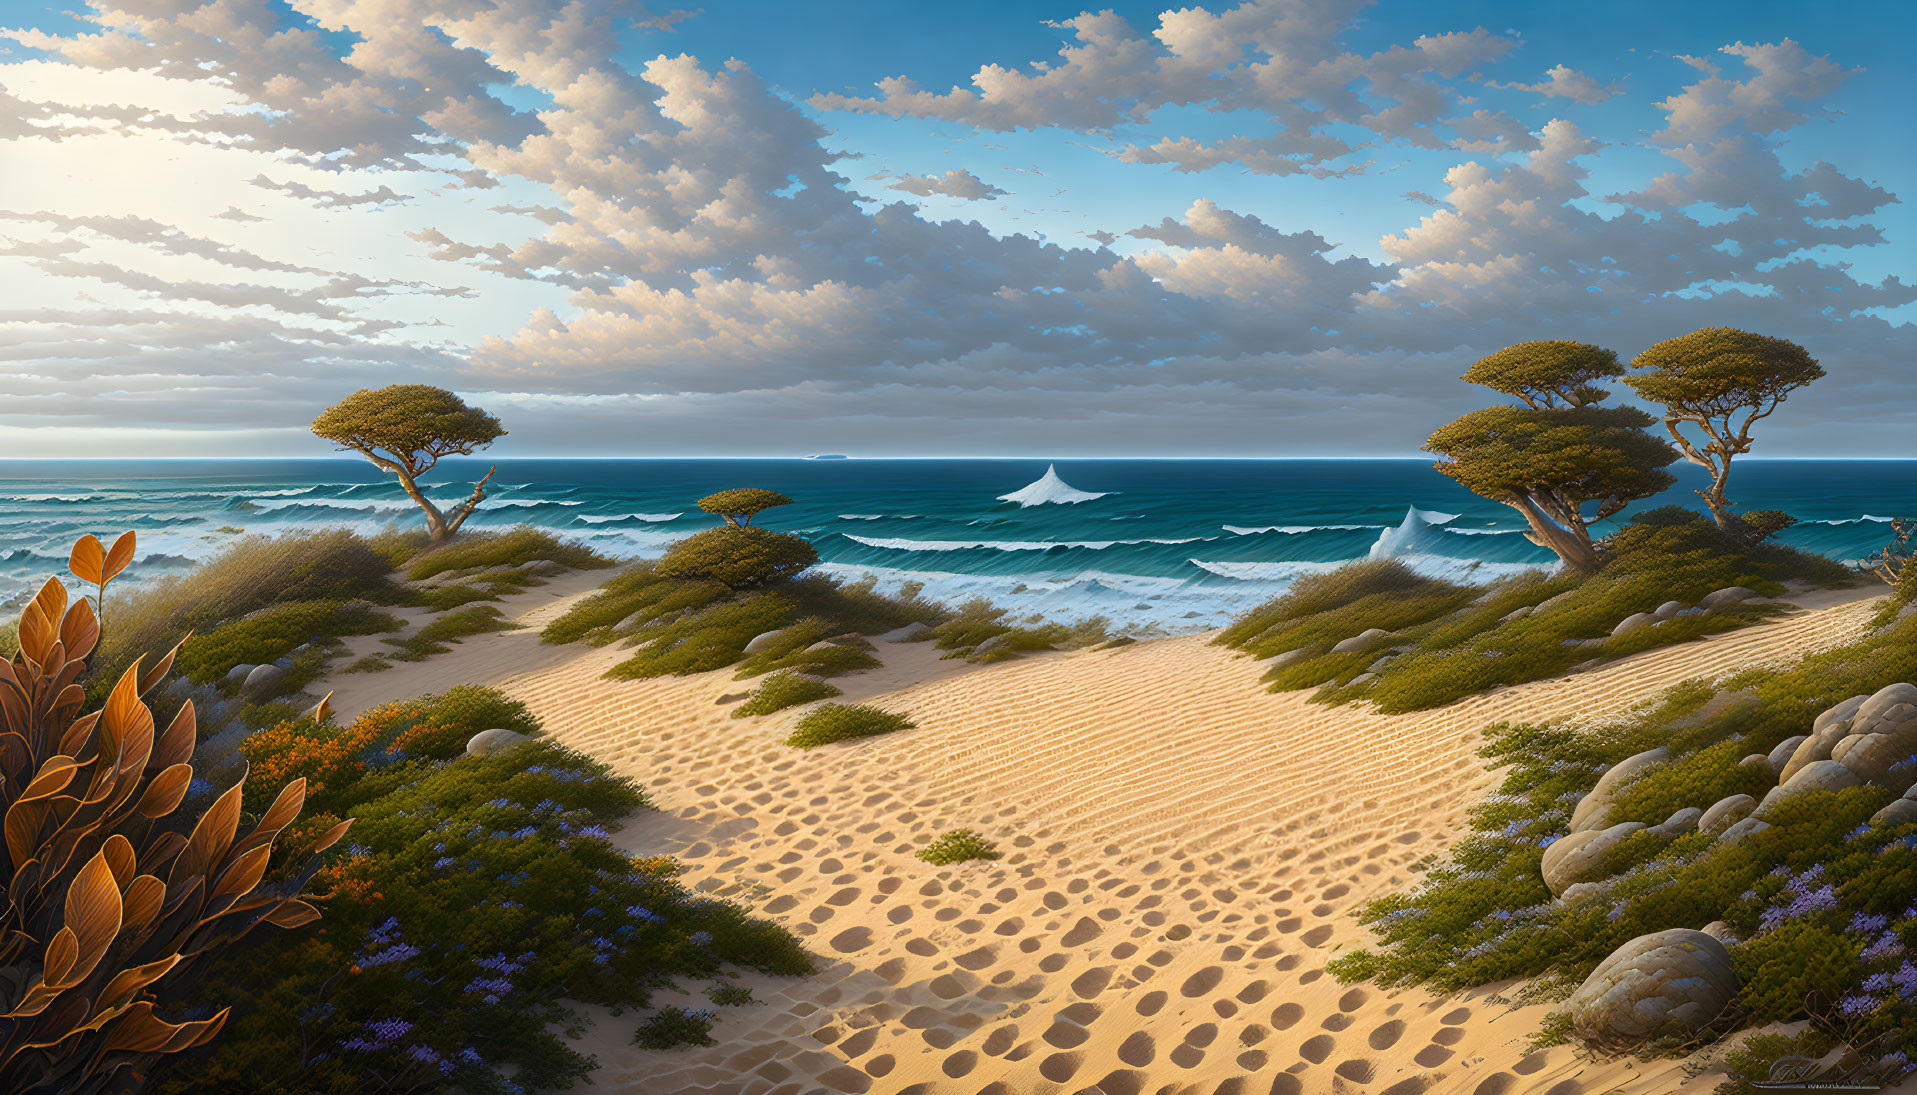 Tranquil beach landscape with dunes, shrubbery, ocean, sailboat, and cloudy